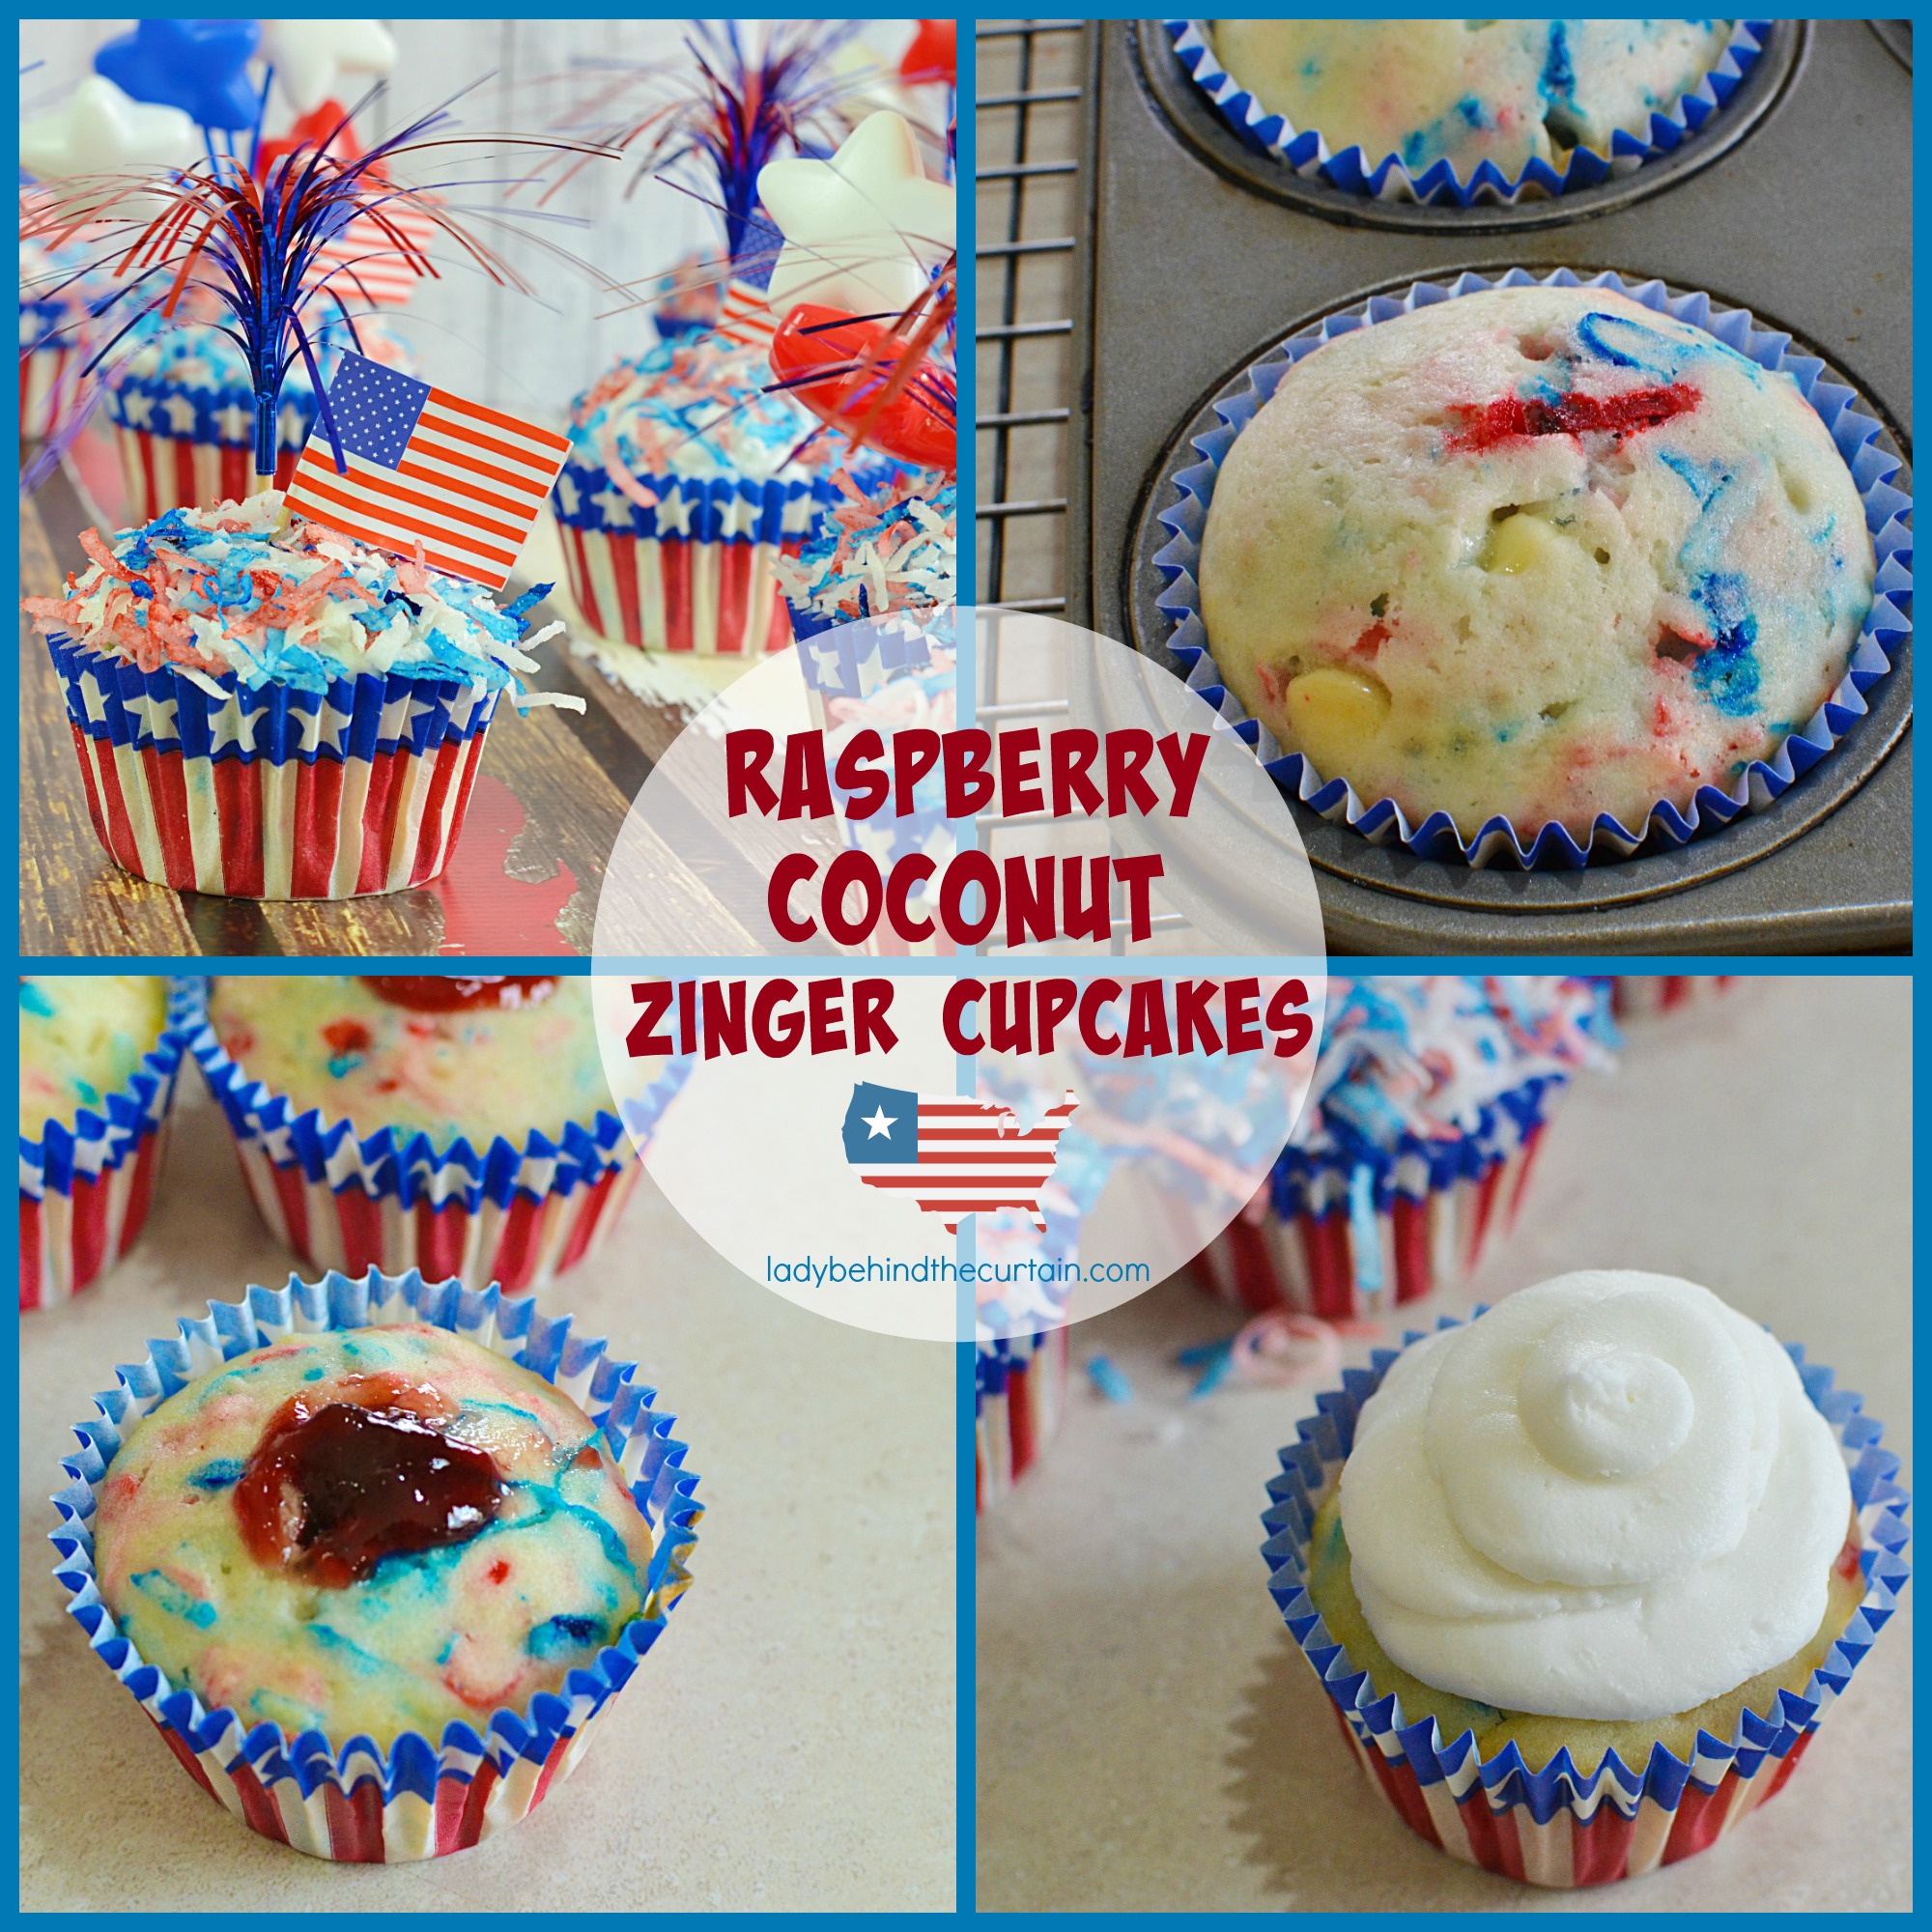 Raspberry Coconut Zinger Cupcakes | These delicious cupcakes have a mixture of coconut and white chocolate chips and a hidden raspberry treasure.